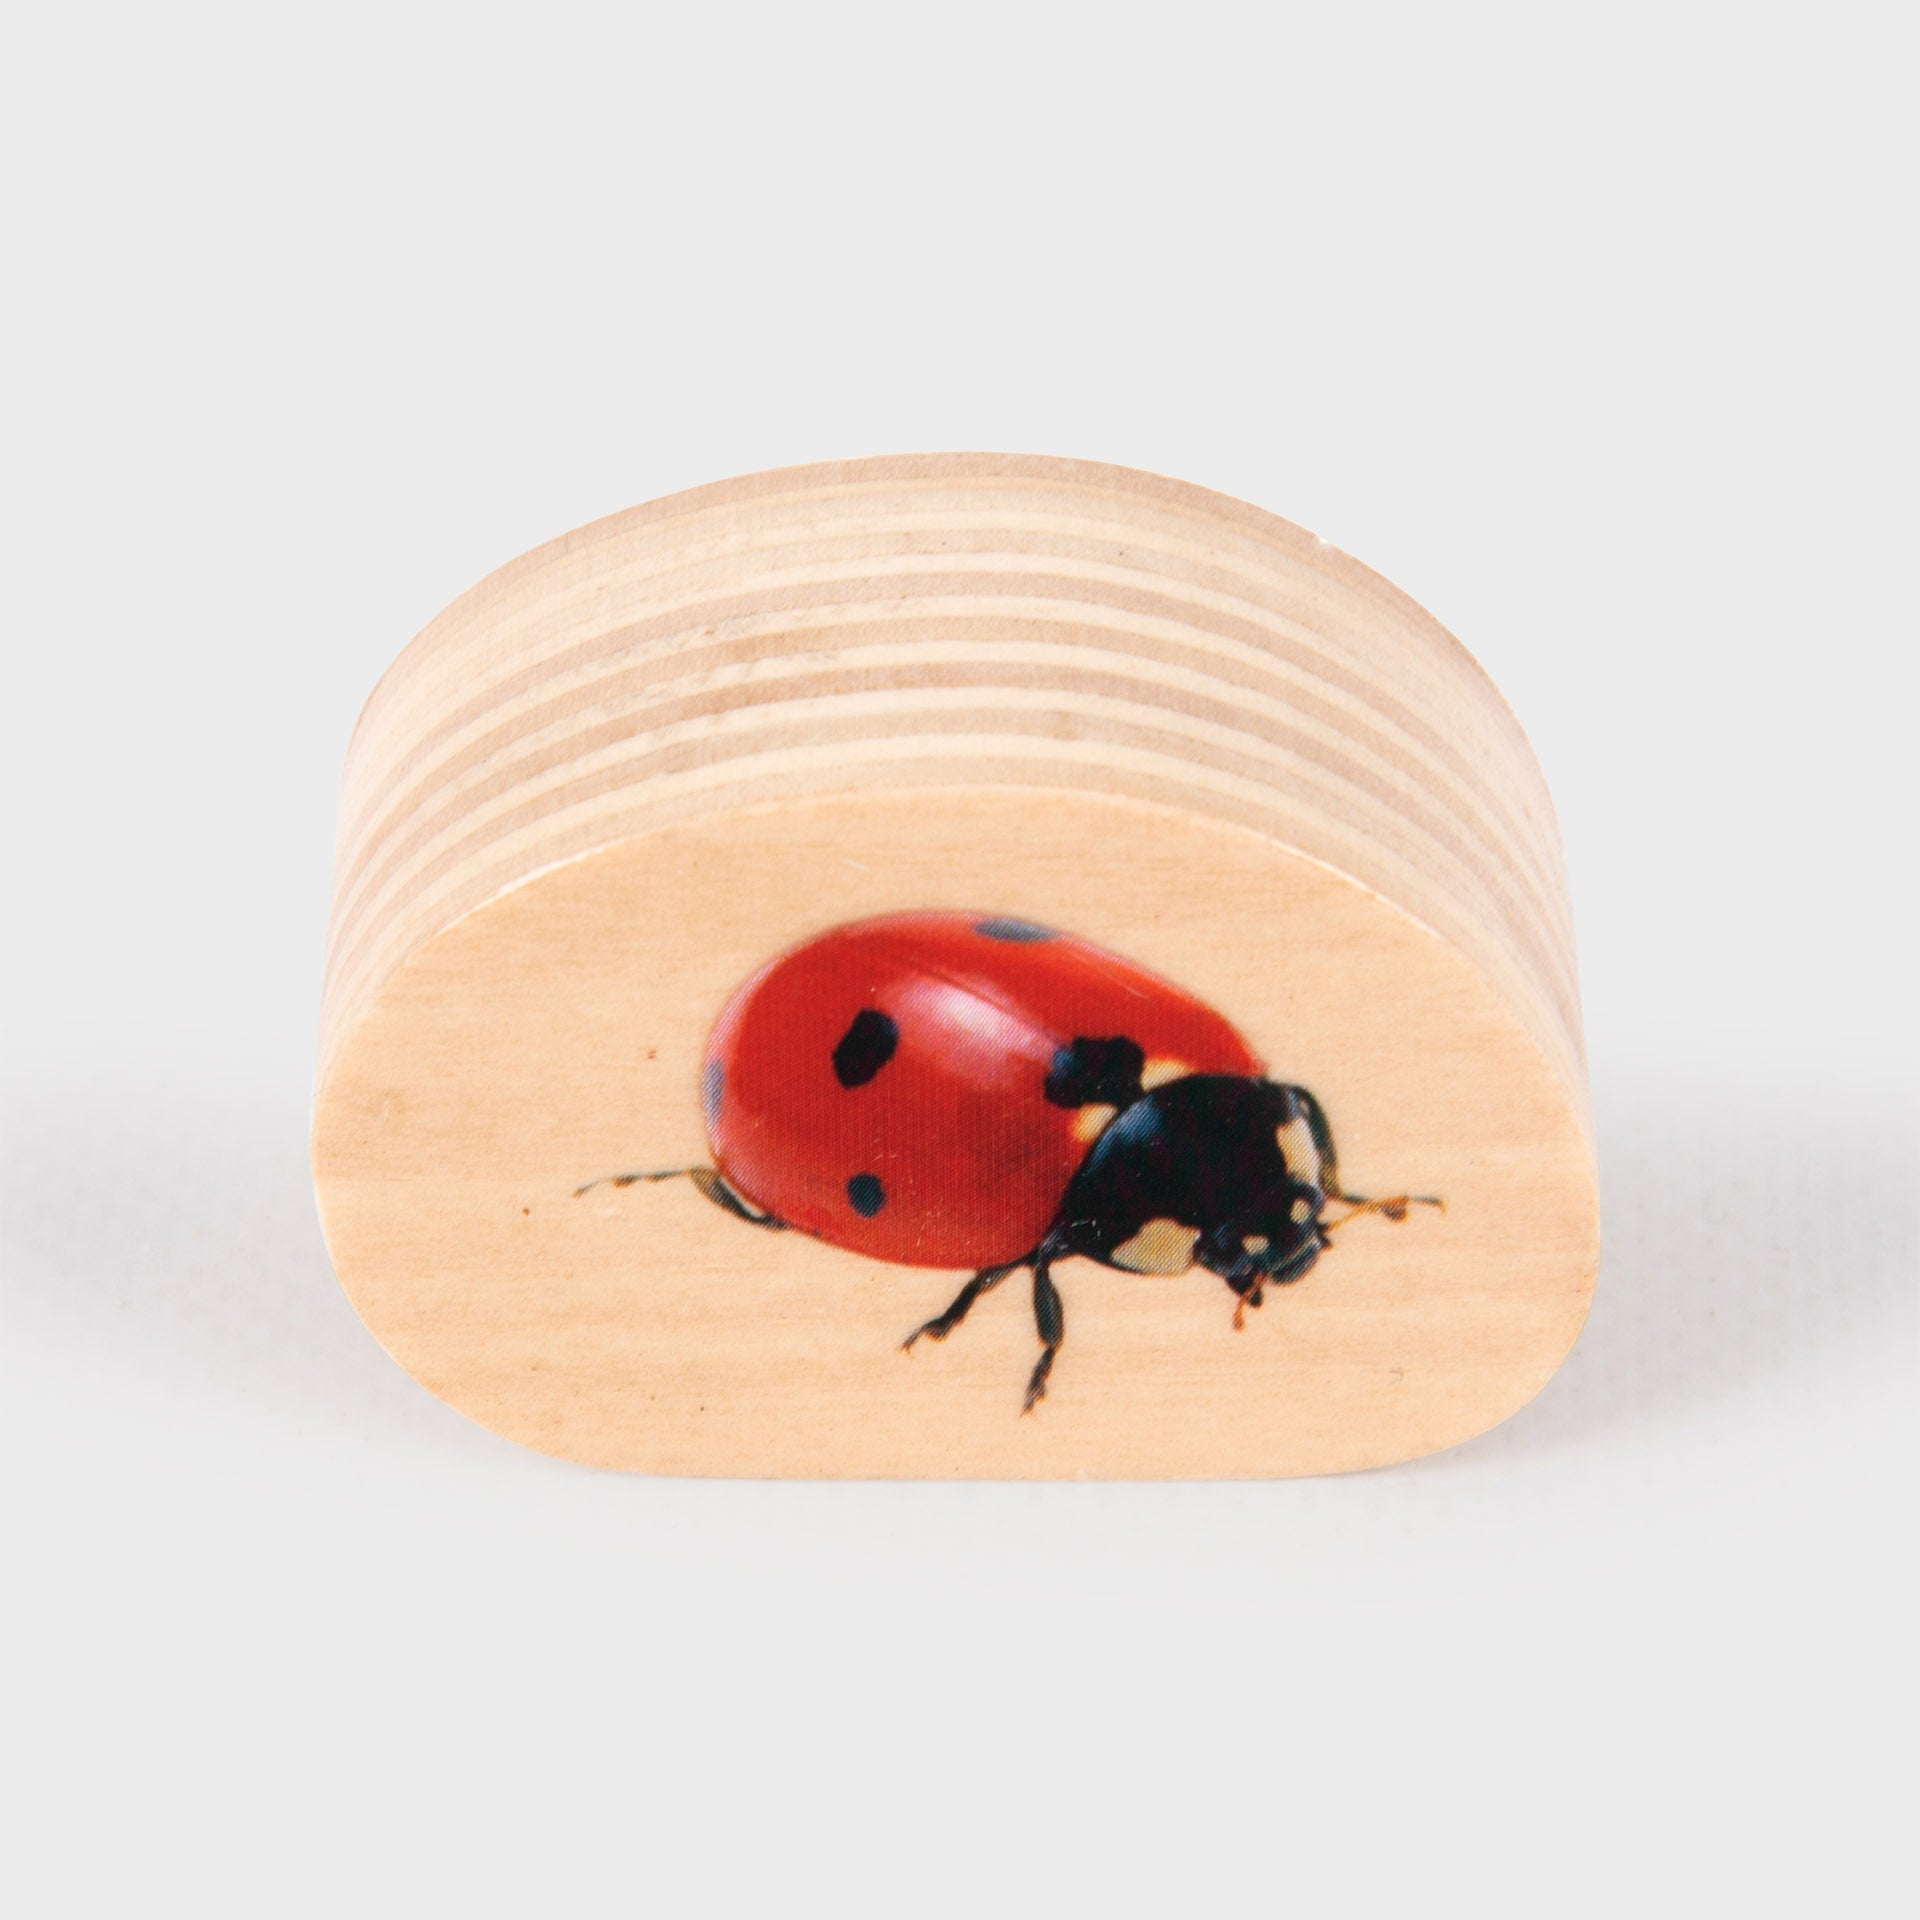 TickiT Wooden Minibeast Blocks, Our TickiT® Wooden Minibeast Blocks are a great way for your child to examine creepy crawlies up close as the chunky wooden picture blocks are colour printed on both sides with real photographic images of minibeasts from around the world.The realistic imagery will enable your child to learn about bugs and inspire them to identify insects when out on nature walks or see them in books. Older children can be encouraged to visualise characters in story-telling and creative writin